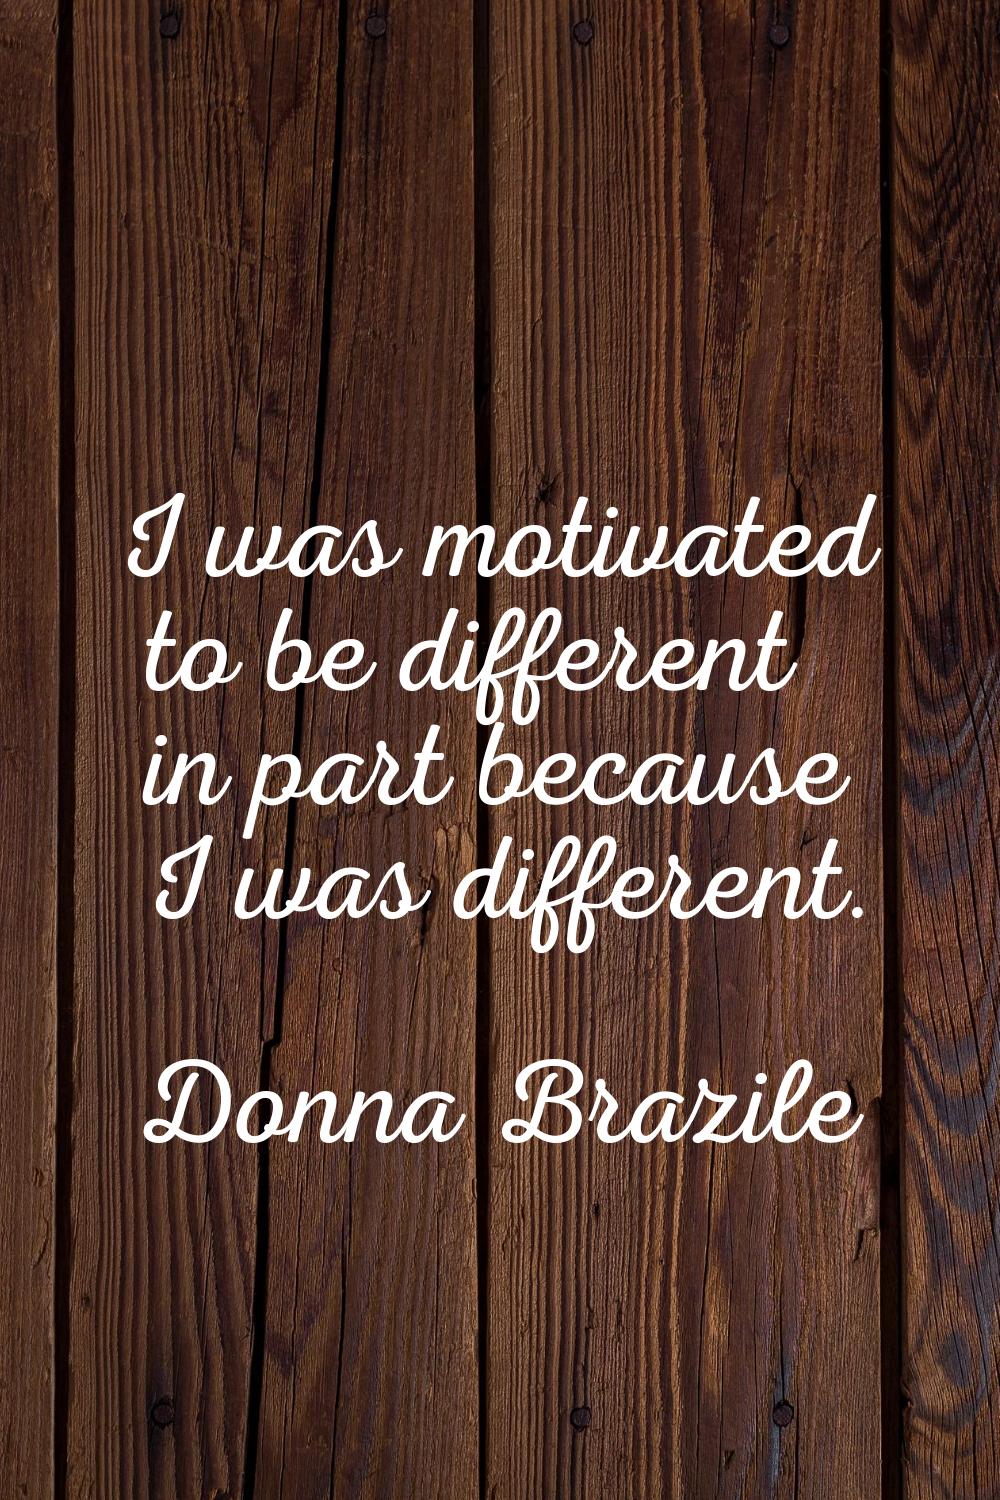 I was motivated to be different in part because I was different.